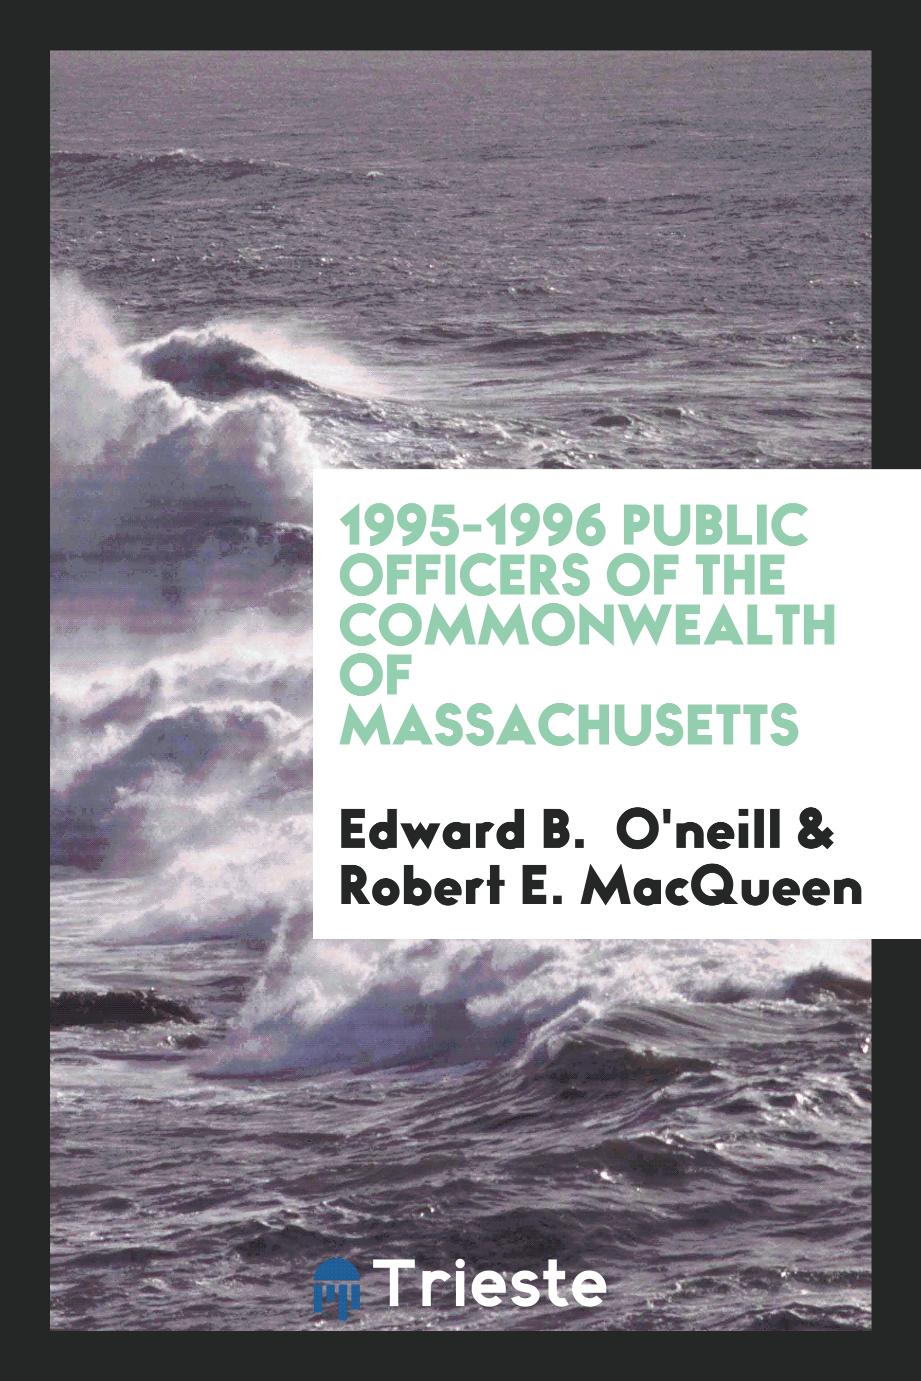 1995-1996 public officers of the Commonwealth of Massachusetts